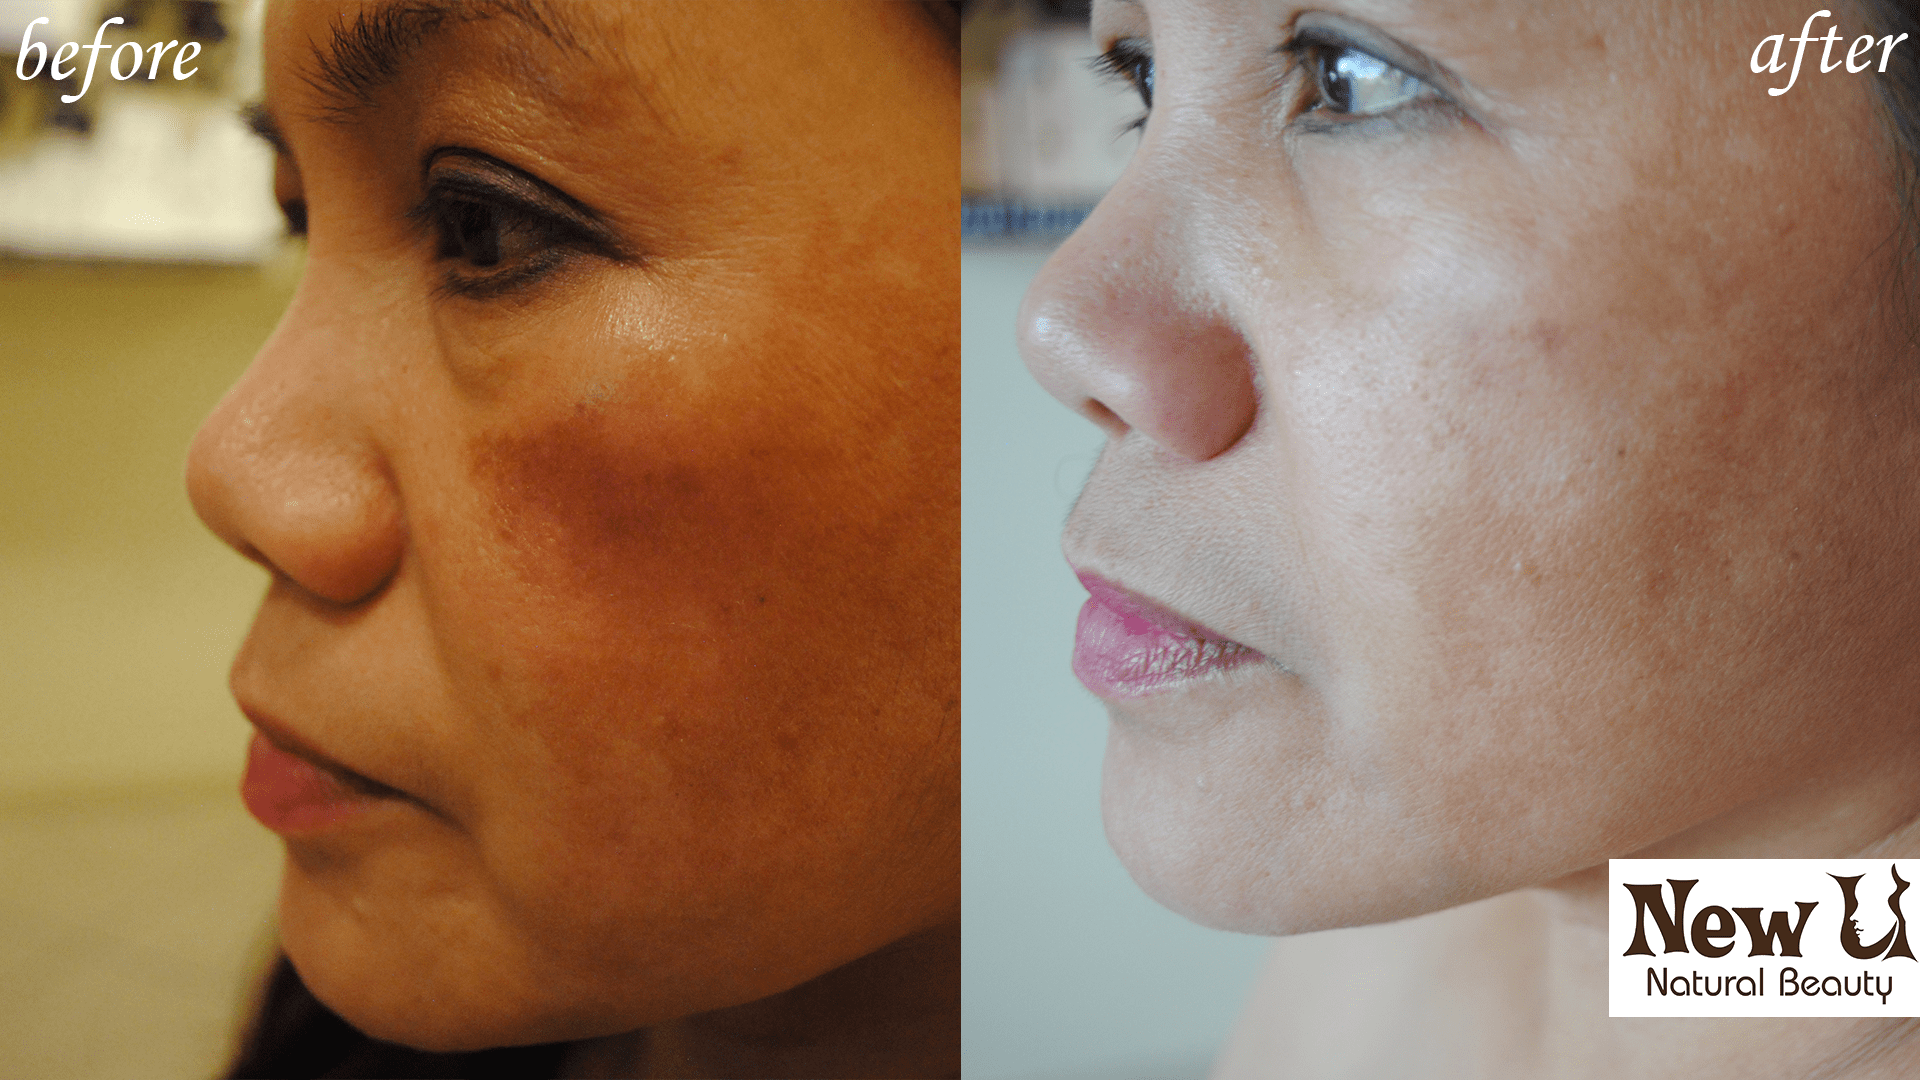 Organic Skin Care 2 Las Vegas Before and After